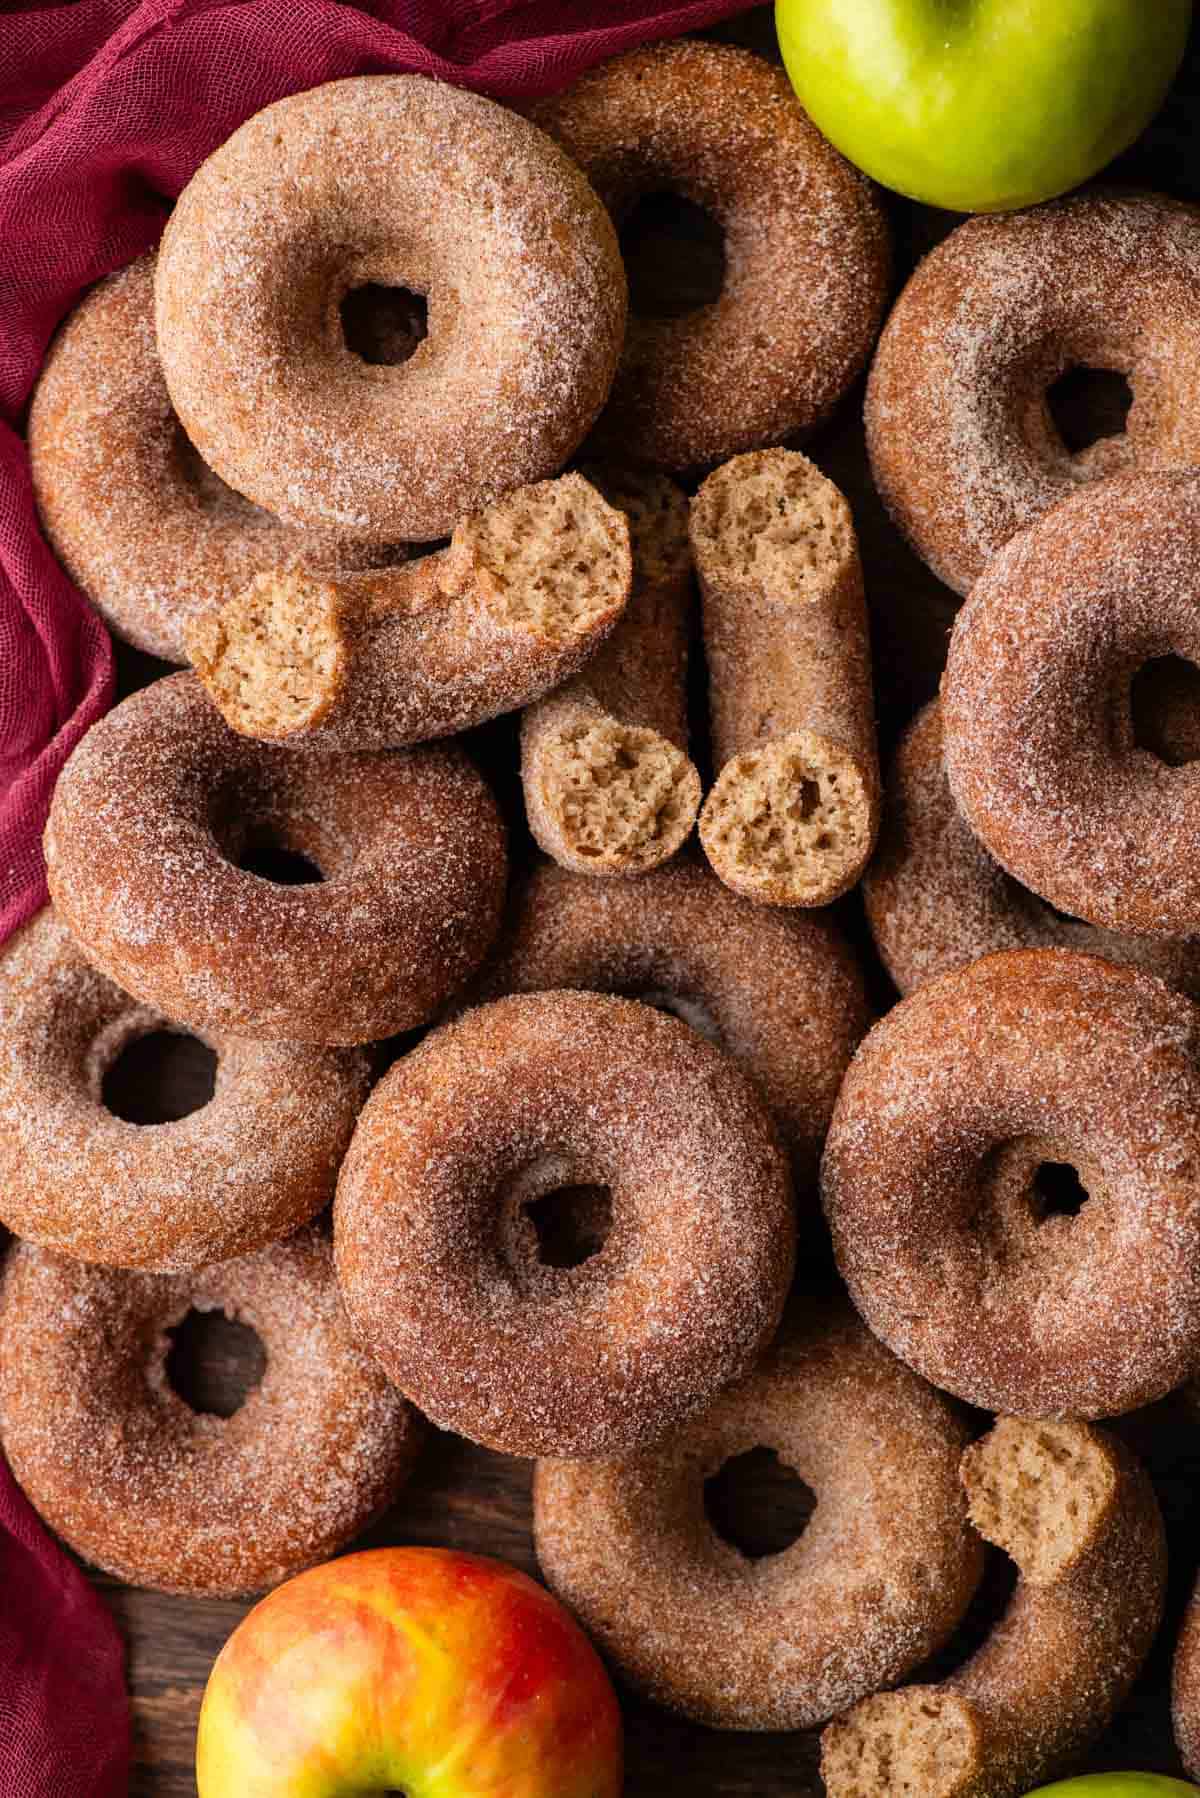 a pile of apple cider donuts on a maroon towel, with a few half donuts on top and a whole green apple near the top right